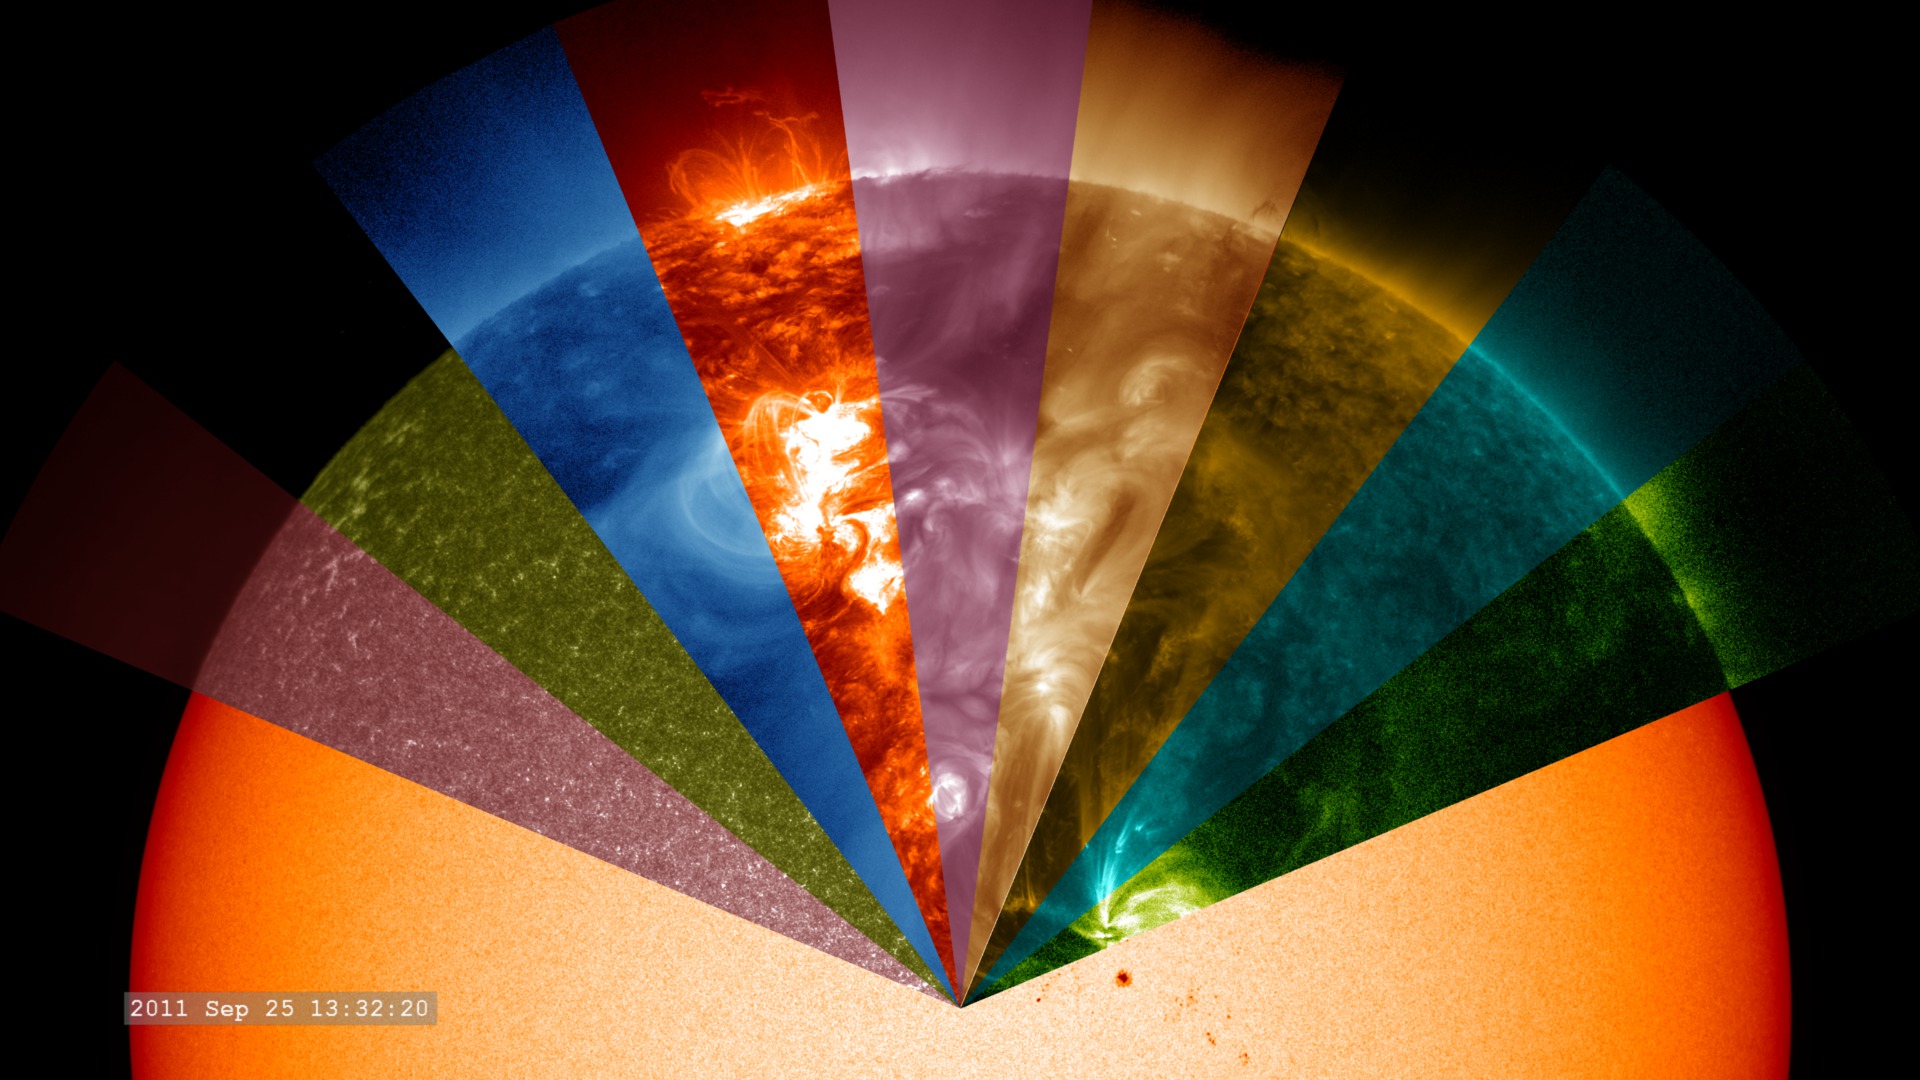 The movie opens with a full-disk view of the Sun in visible wavelengths.  Then the filters are applied to small pie-shaped wedges of the Sun, starting with 170nm (pink), then 160nm (green), 33.5nm (blue), 30.4nm (orange), 21.1nm (violet), 19.3nm (bronze), 17.1nm (gold), 13.1nm (aqua) and 9.4nm (green).  We let the set of filters sweep around the solar disk and then zoom and rotate the camera to rotate with the filters as the solar image is rotate underneath. This video is also available on our YouTube channel.